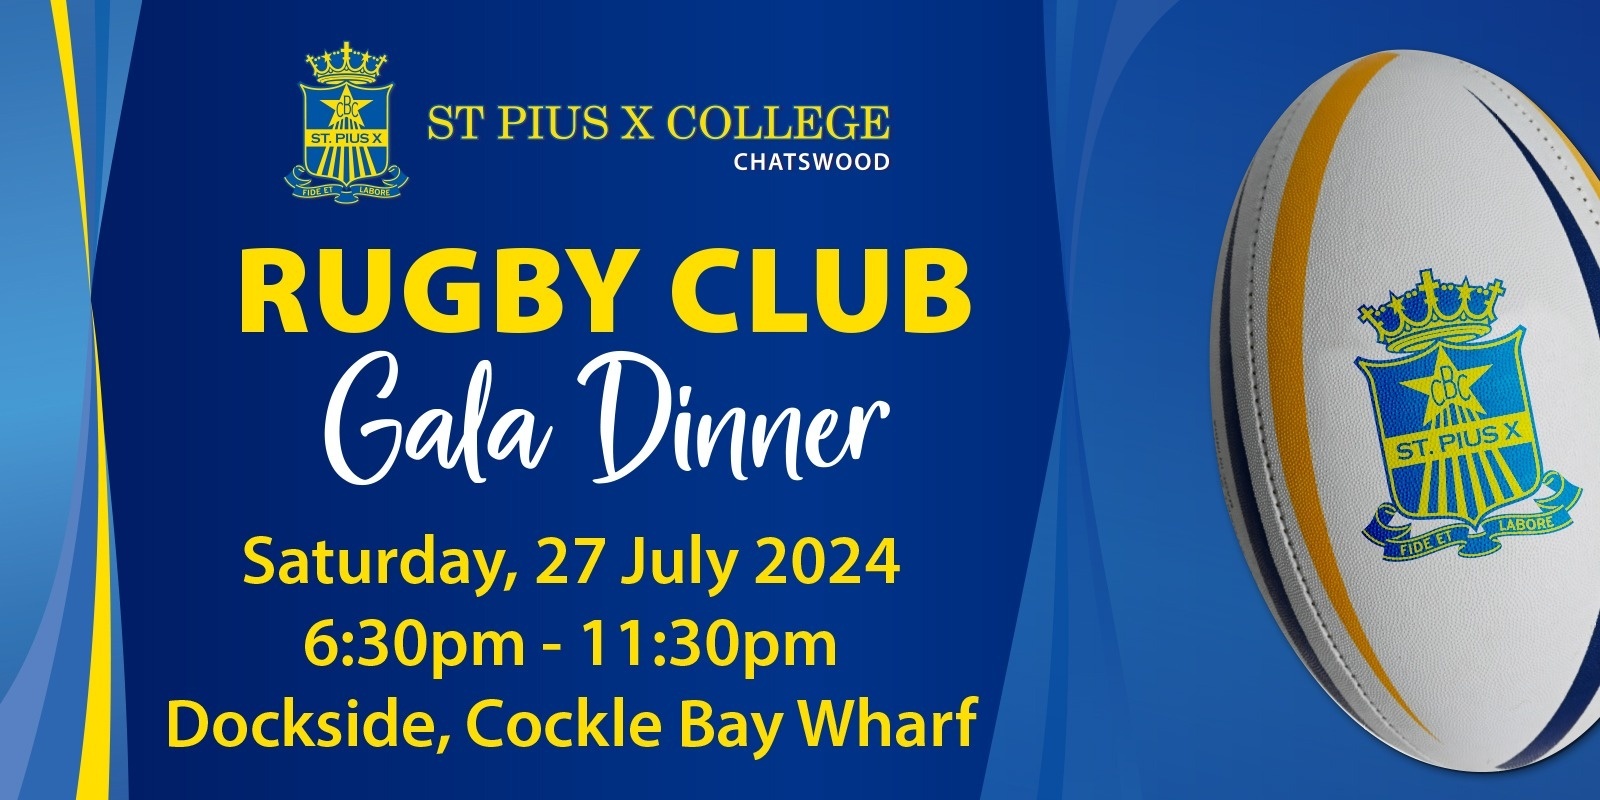 Banner image for St Pius X Rugby Club Gala Dinner 2024